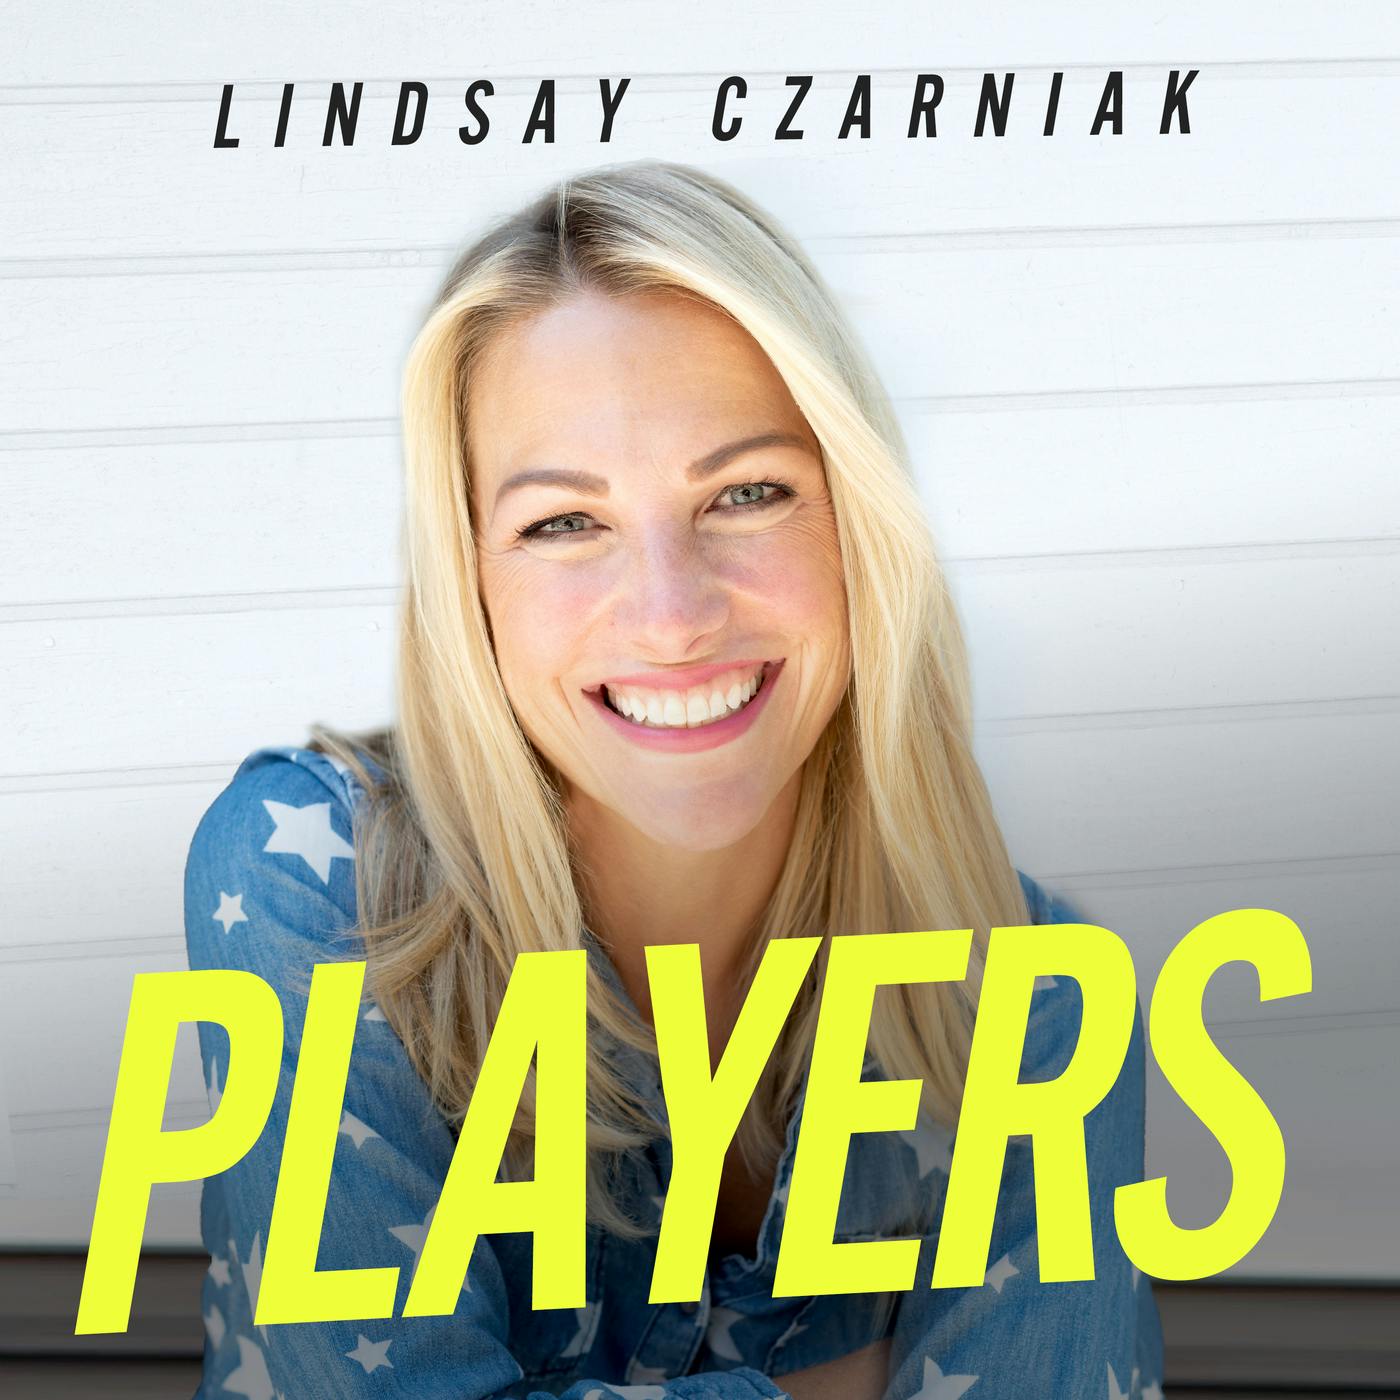 Introduction to Players with Lindsay Czarniak